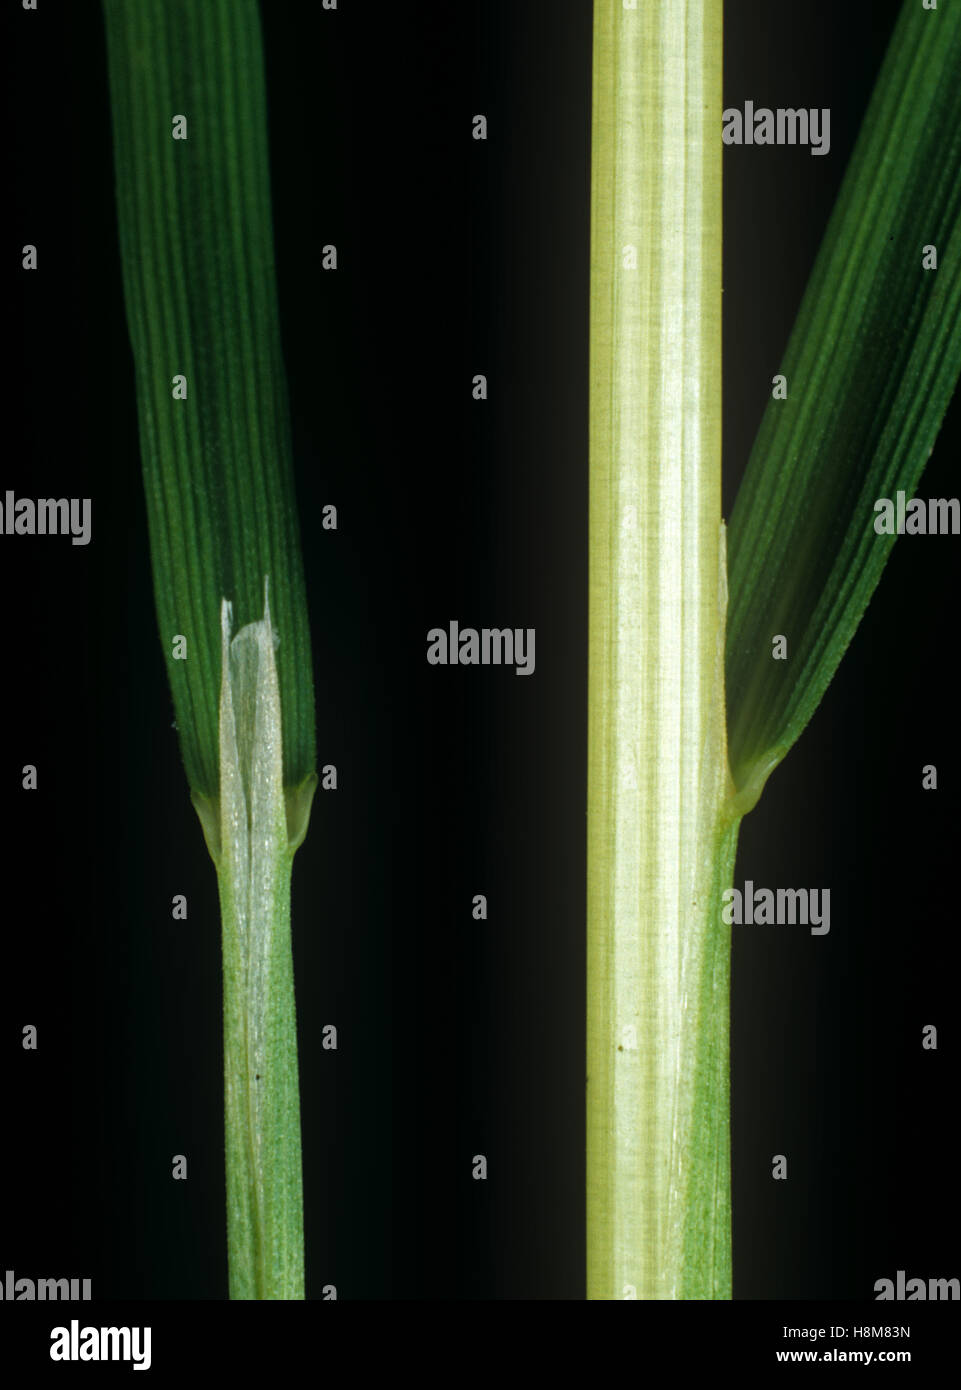 Loose silky-bent, Apera spica-venti, leaf ligule at the node and leafstalk of an agricultural grass weed Stock Photo